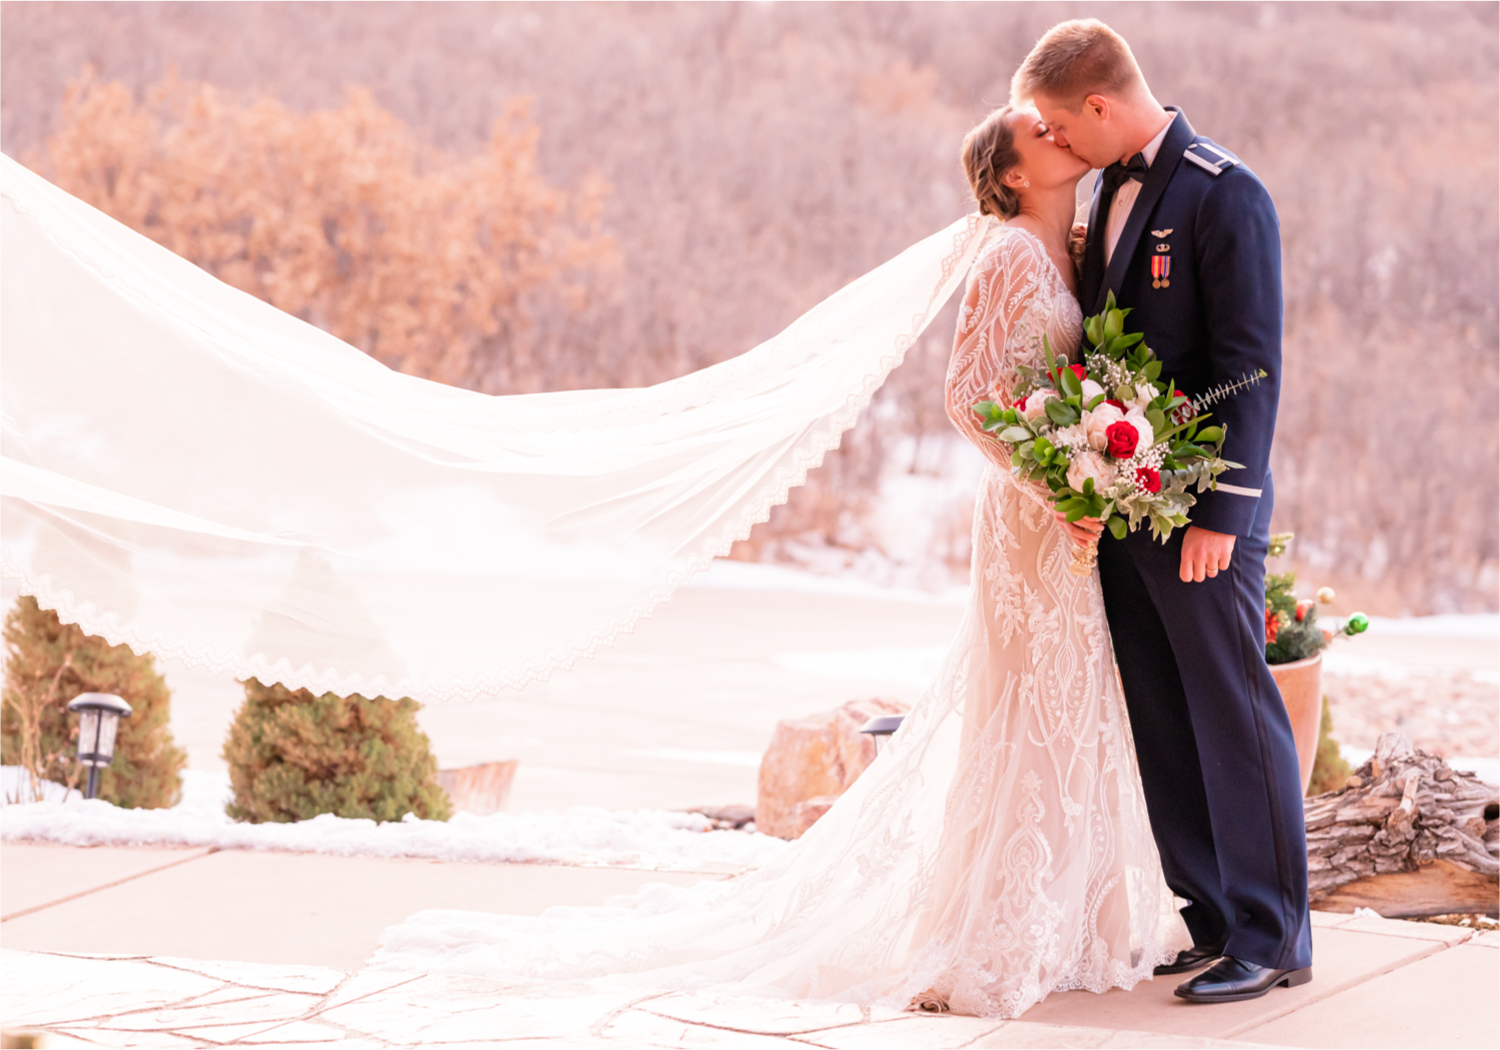 Winter Wonderland Wedding in Colorado Springs | Britni Girard Photography Colorado Wedding Photography and Film Team | Snow covered mountains and Christmas just a few days away | Annika + John's Nostalgic Winter Wedding | Bride's Dress iDream Bridal Essence of Australia | Air Force Academy | Sunset just married photos with veil flying